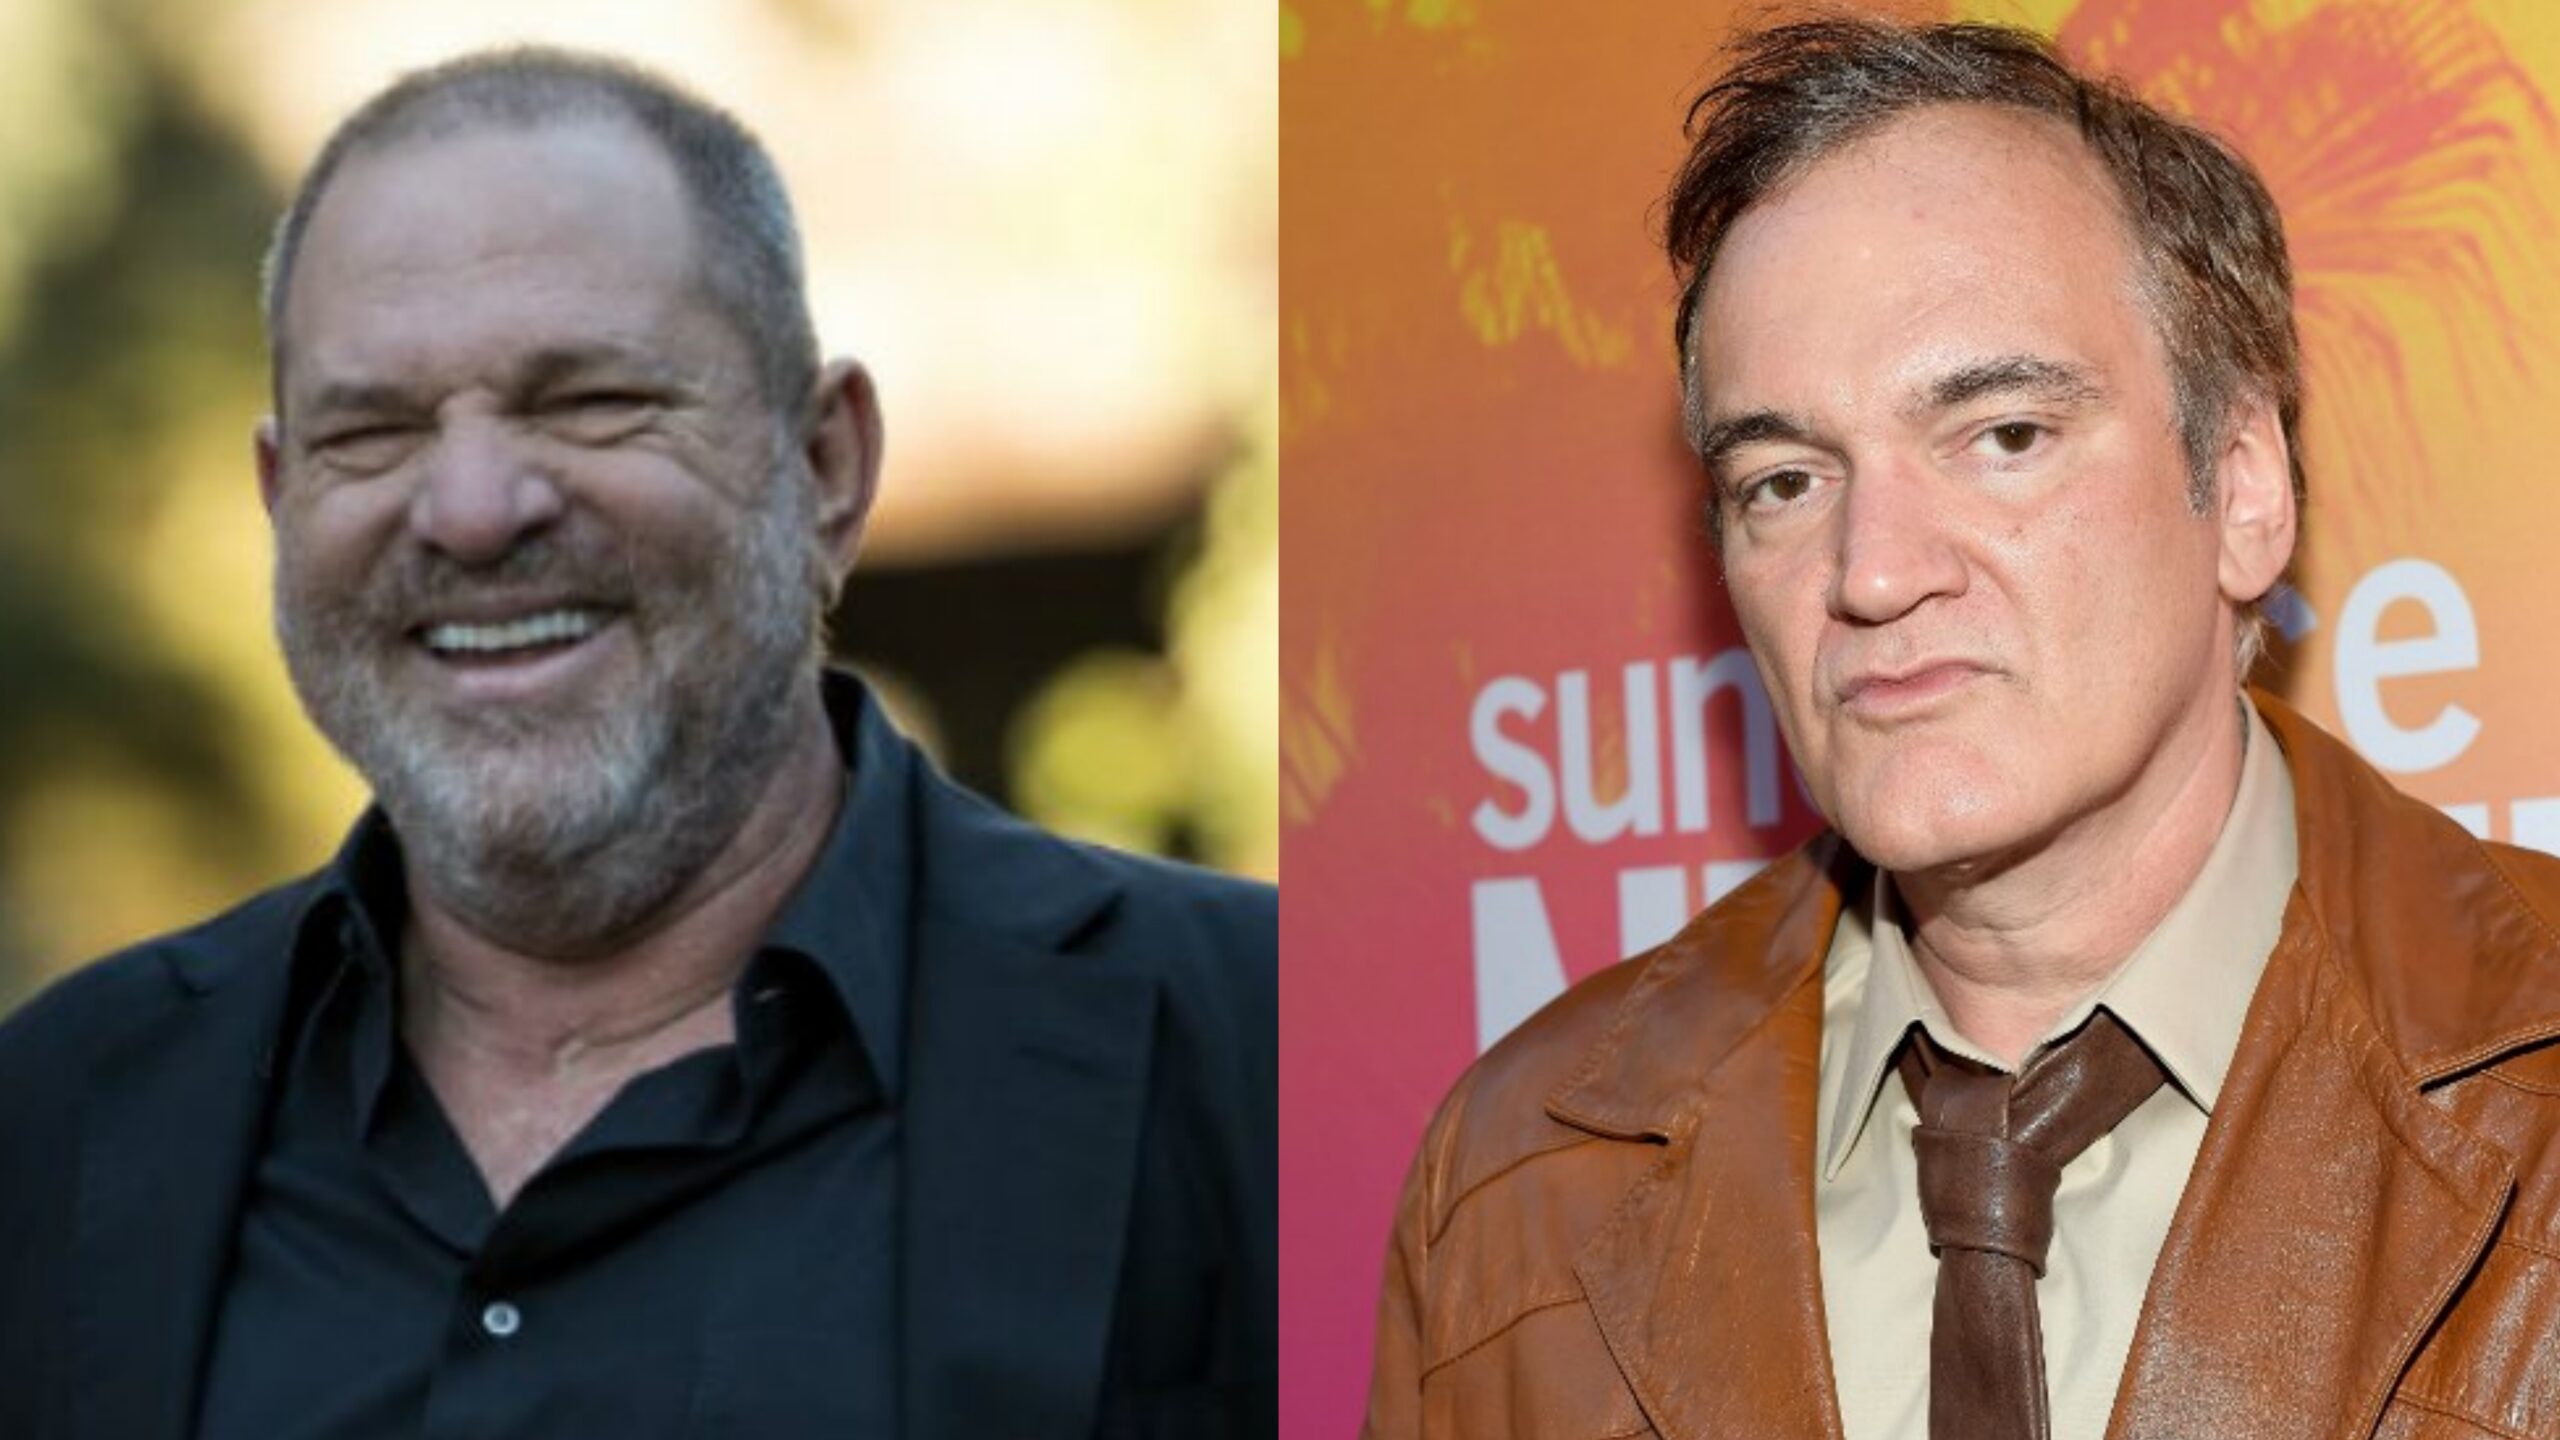 Quentin Tarantino admits he knew of Harvey Weinstein misconduct complaints